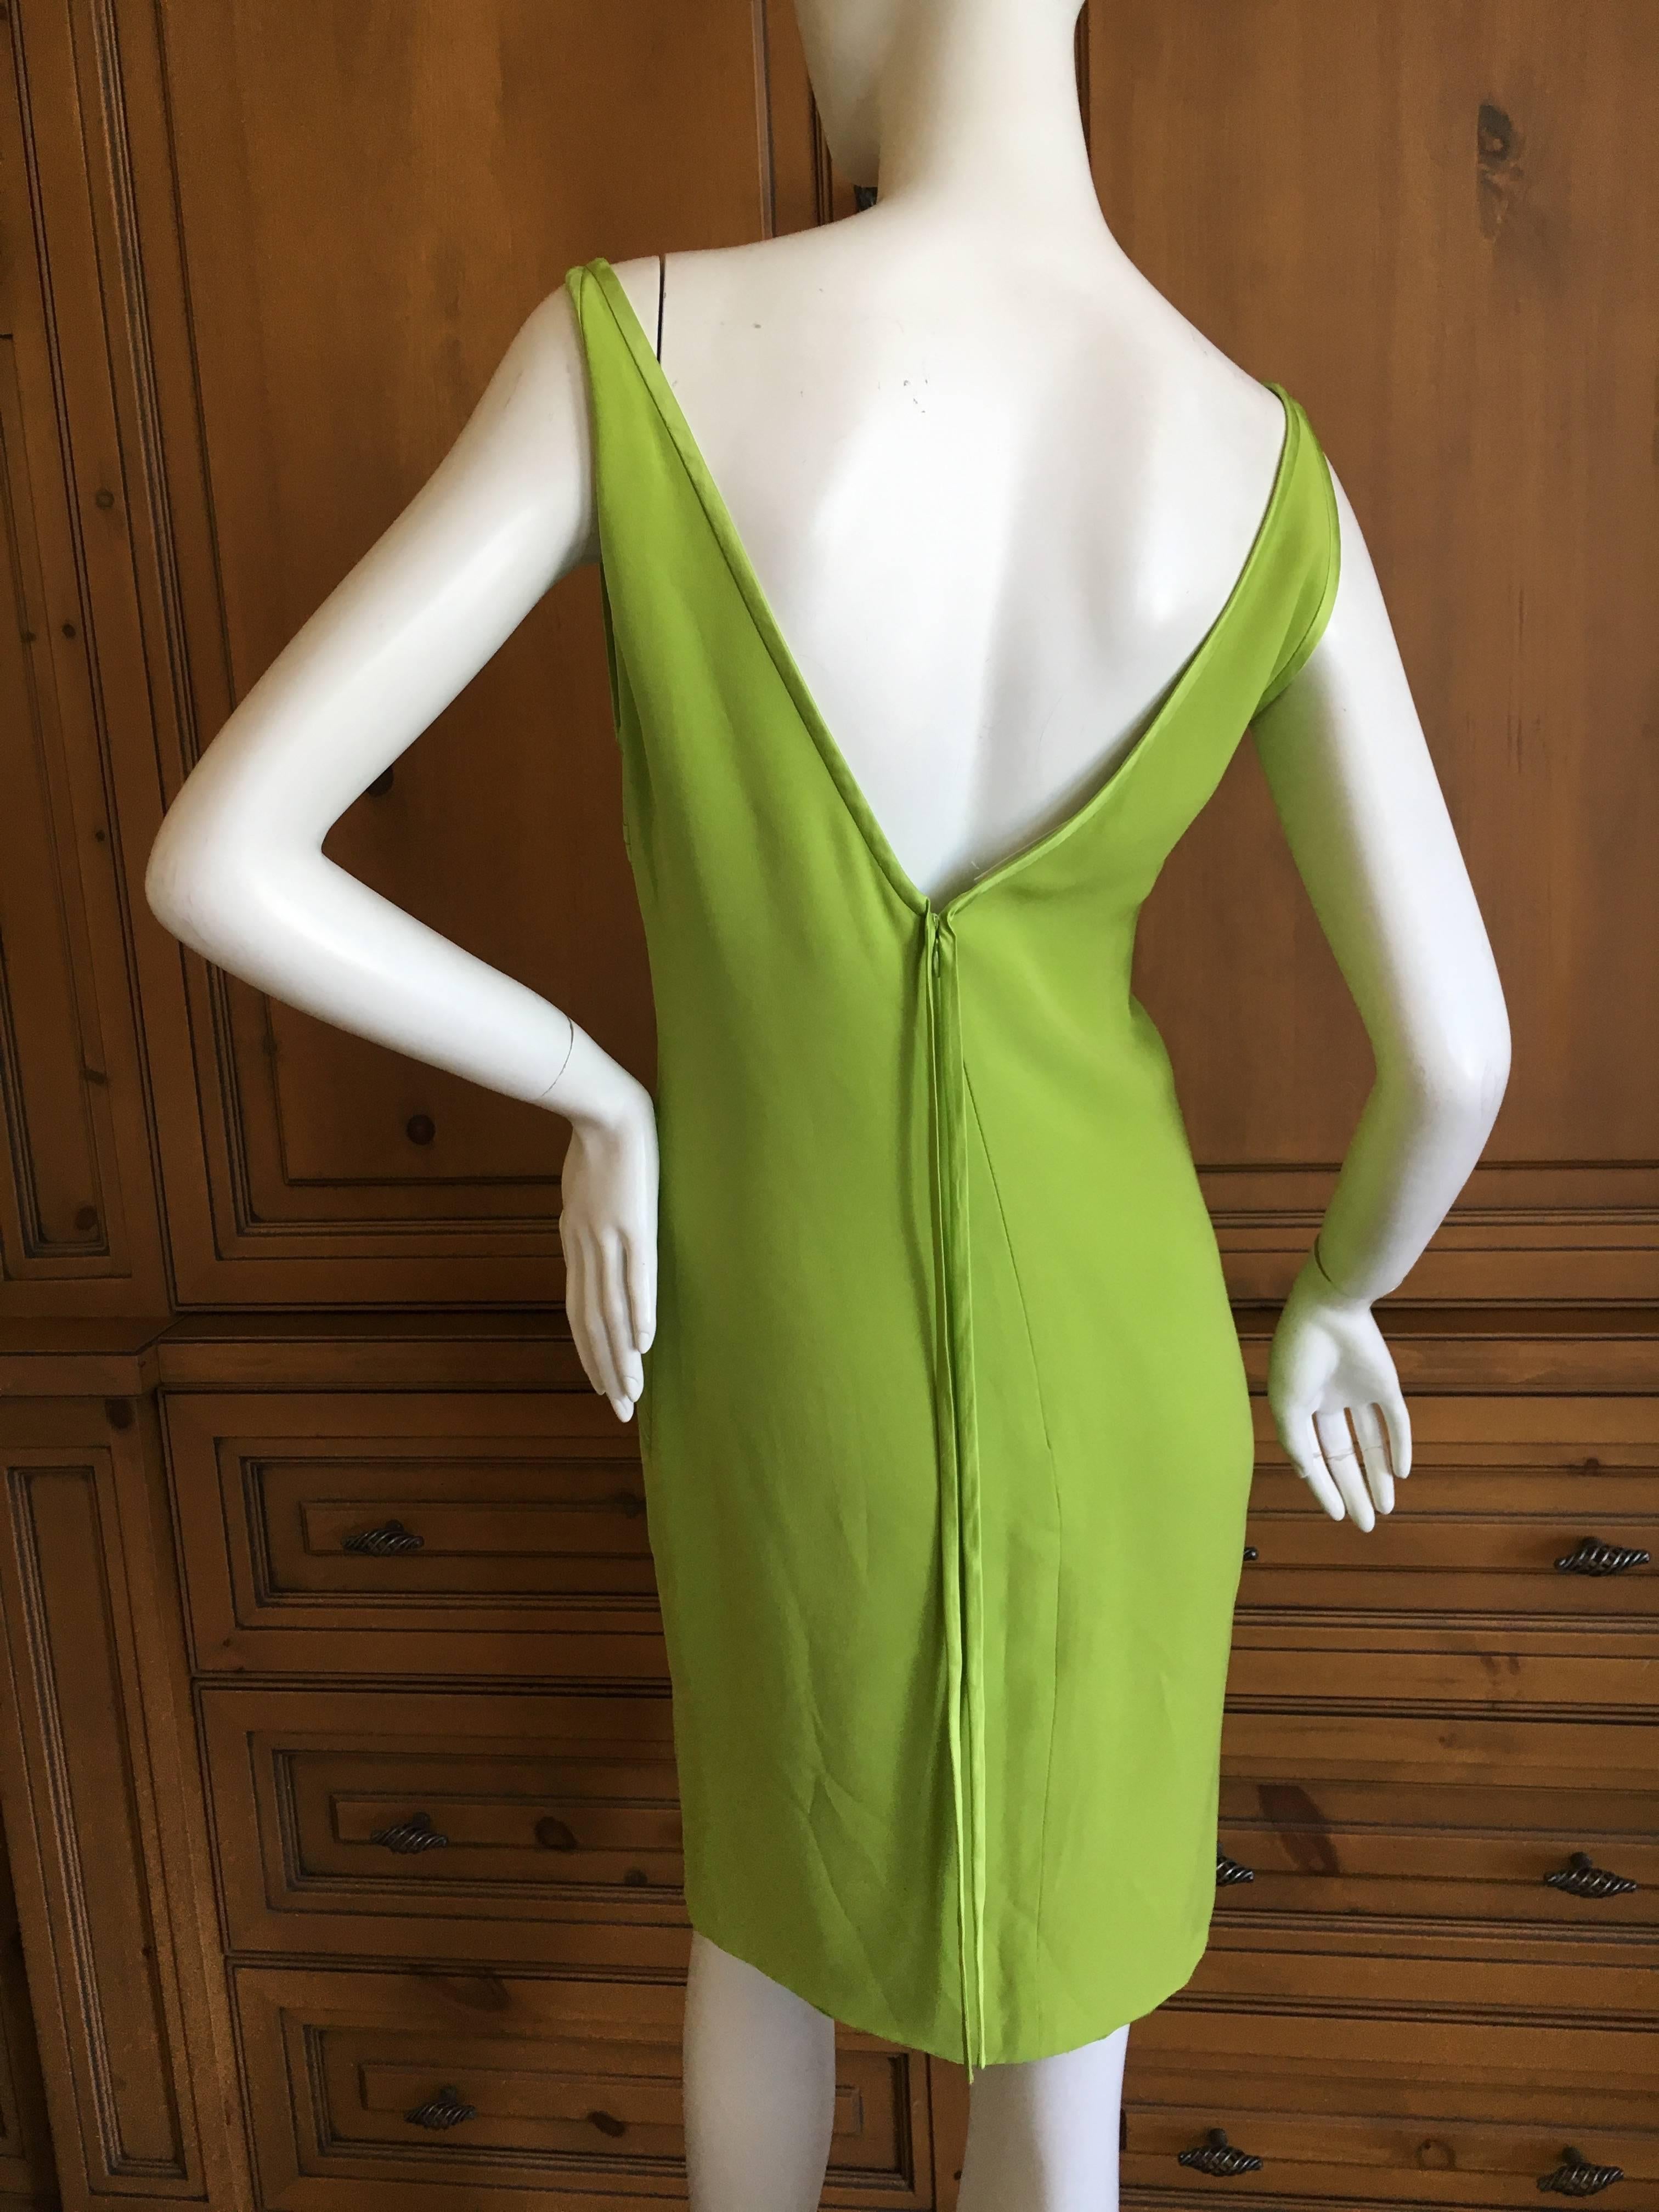 Valentino Vintage Green Silk Cocktail Dress with Peek a Boo Keyhole Details For Sale 6